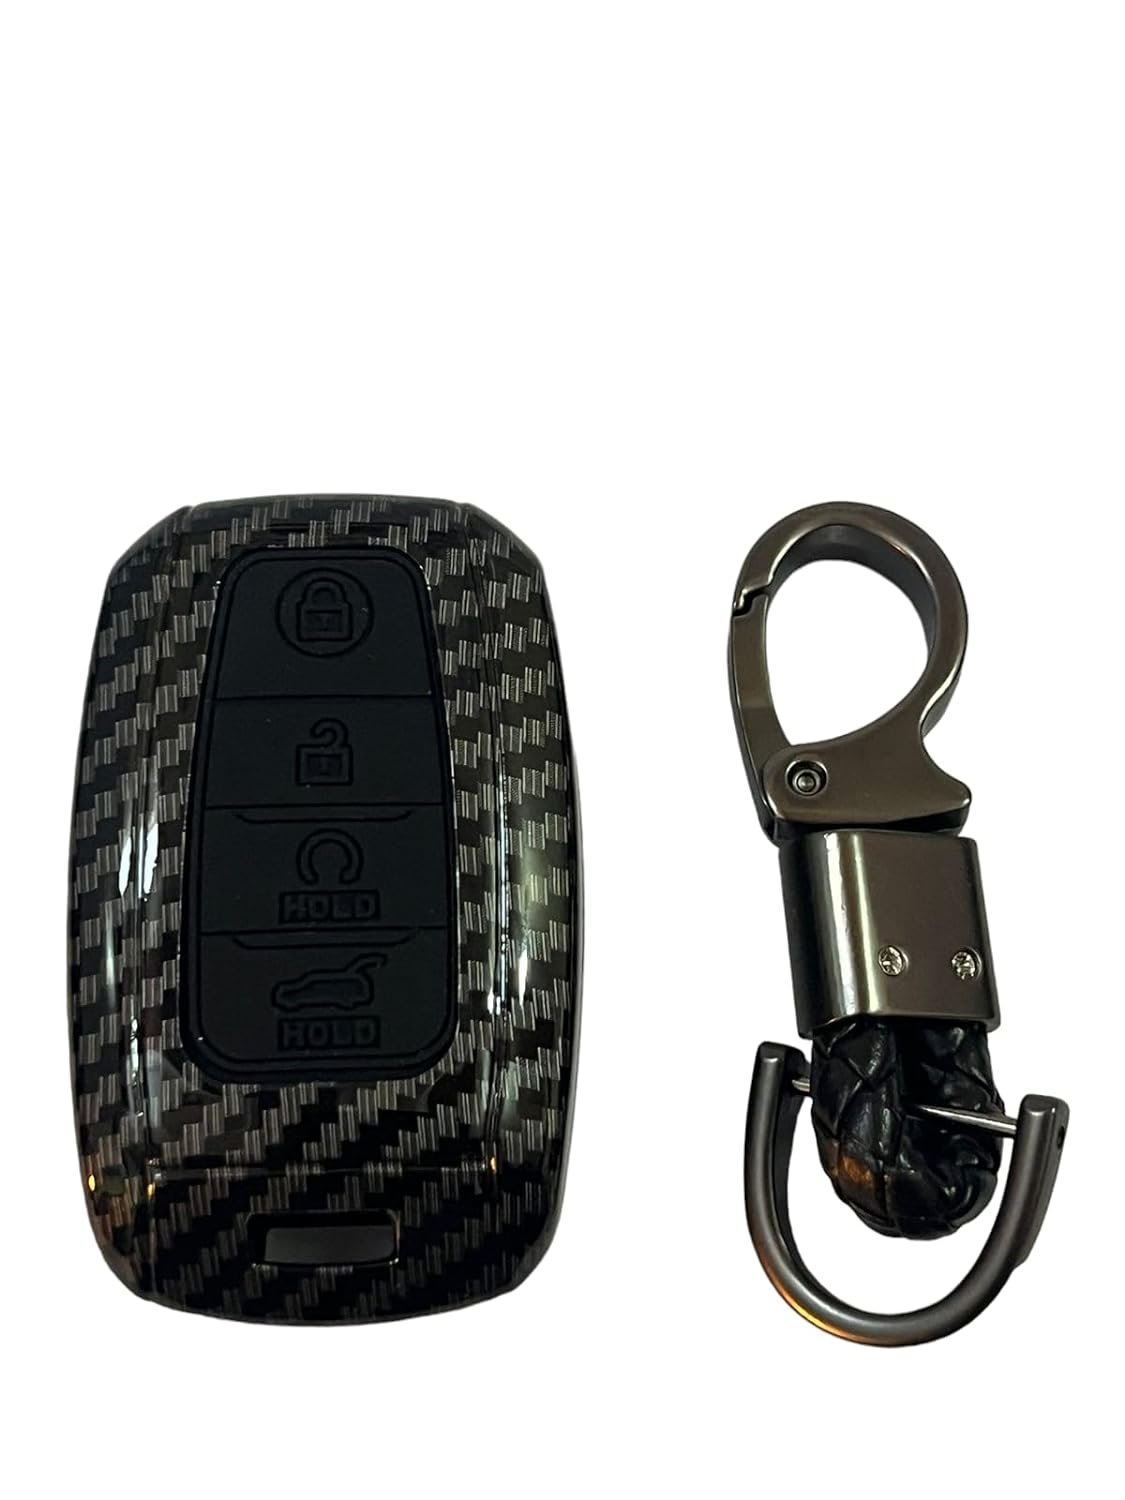 Carbon Fiber ABS Car Key Cover Compatible with Kia Seltos, Sonet, Carens 4Button Smart Key (Key Chain Included) Image 